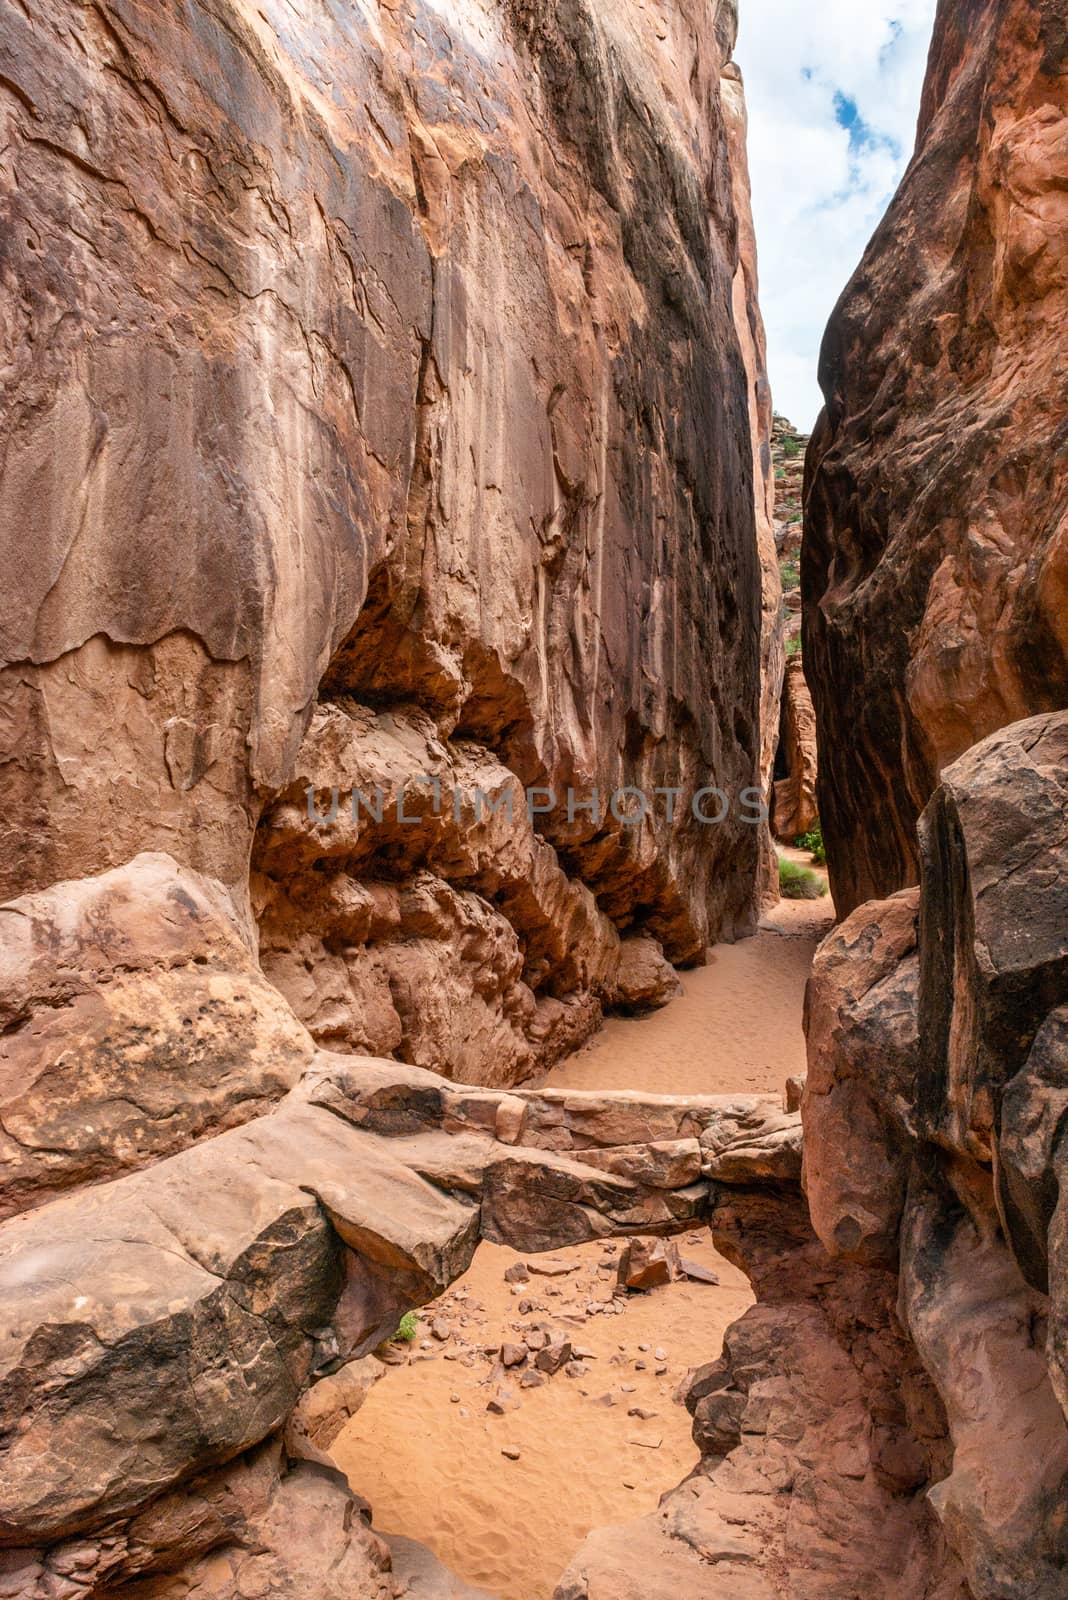 Sandstone bridge in a slot canyon in Fiery Furnace, Arches National Park, Utah